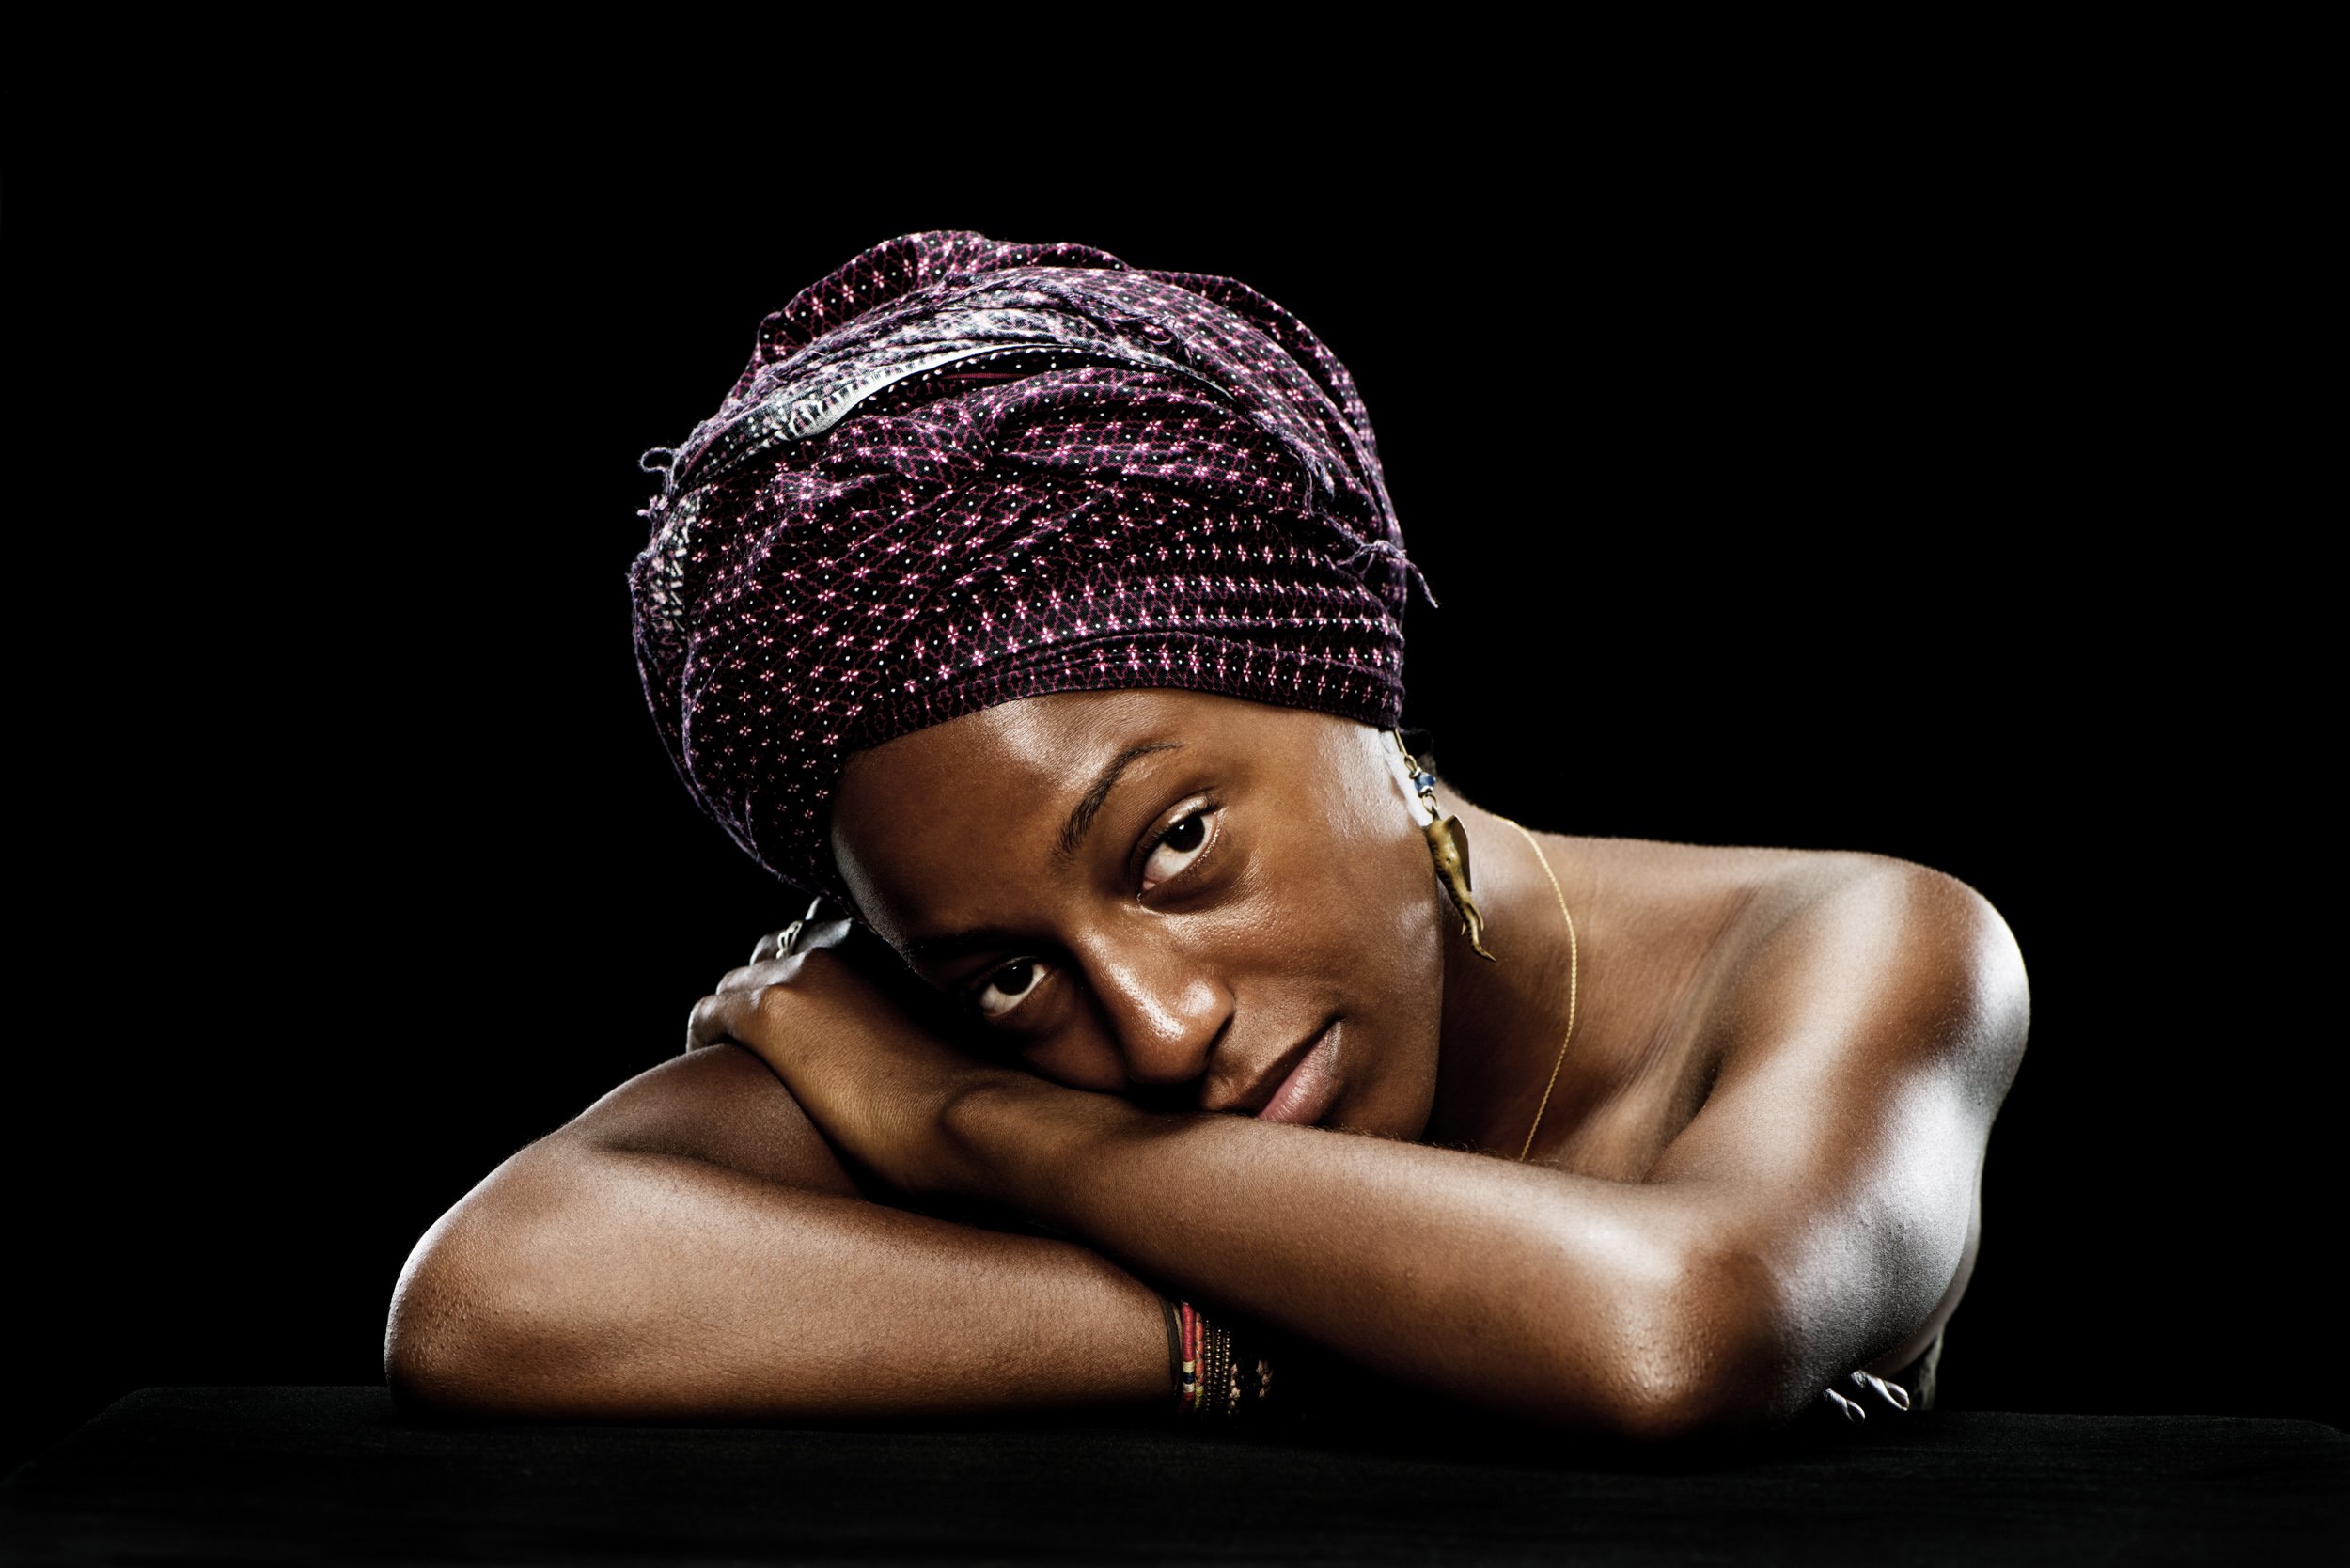 Woman in a headscarf, studio portrait for What is Your Motivation for Taking Photos?